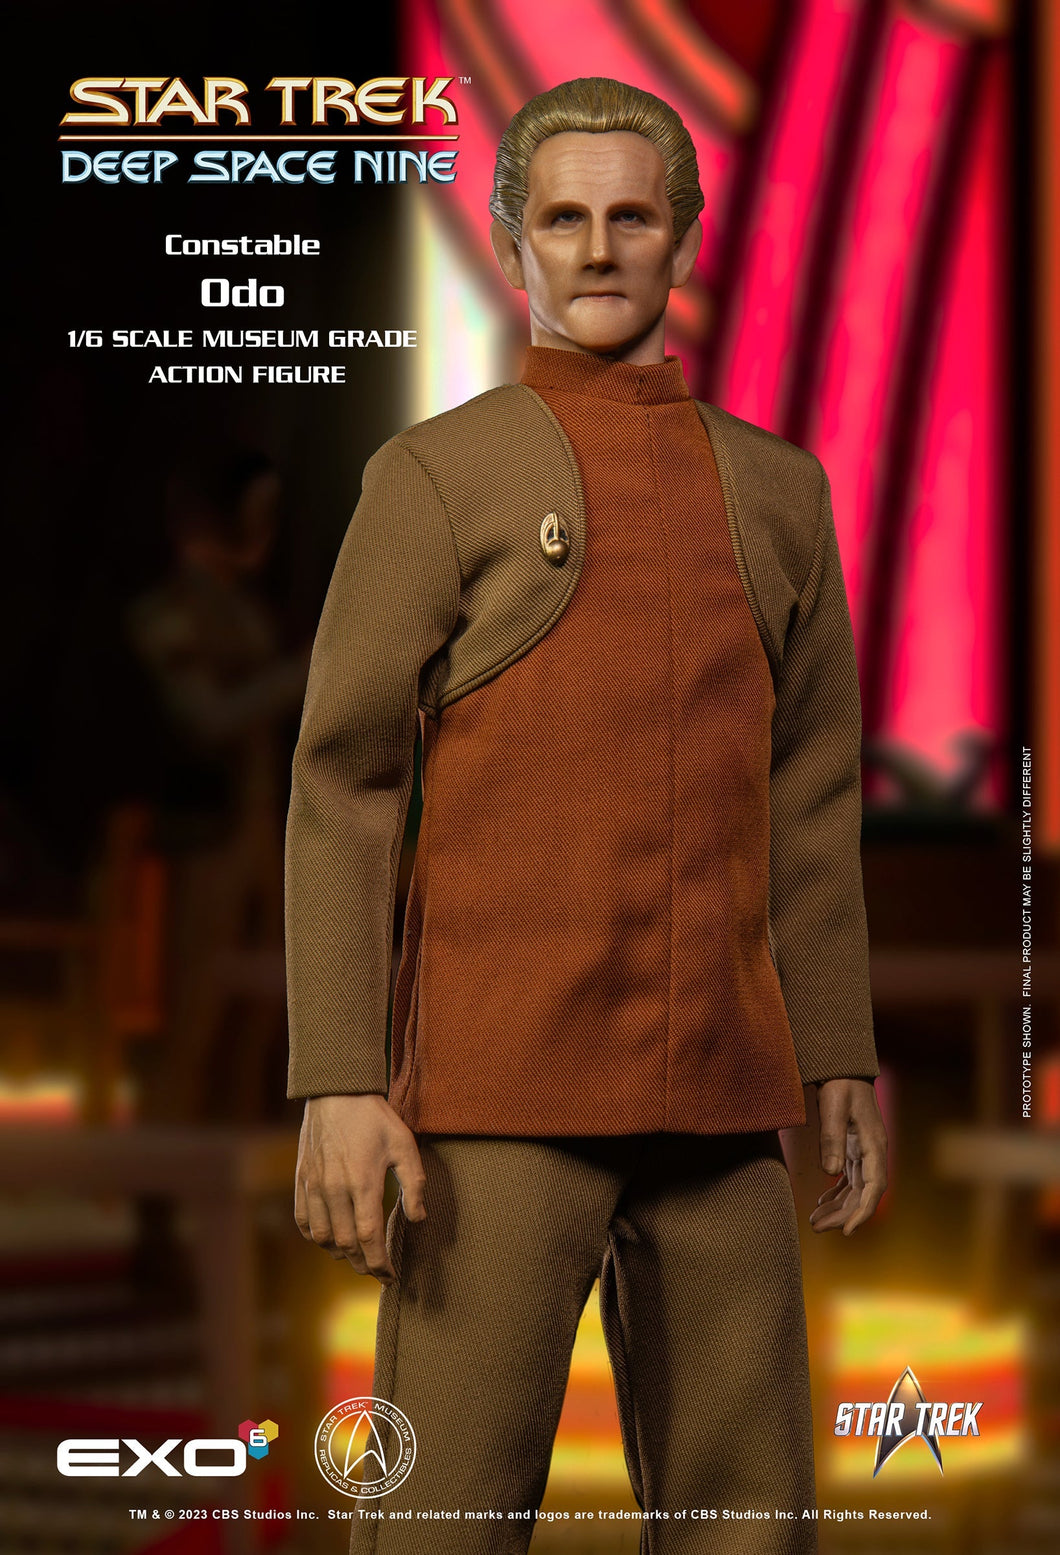 DS9 Constable Odo - Immediate Purchase  SOLD OUT